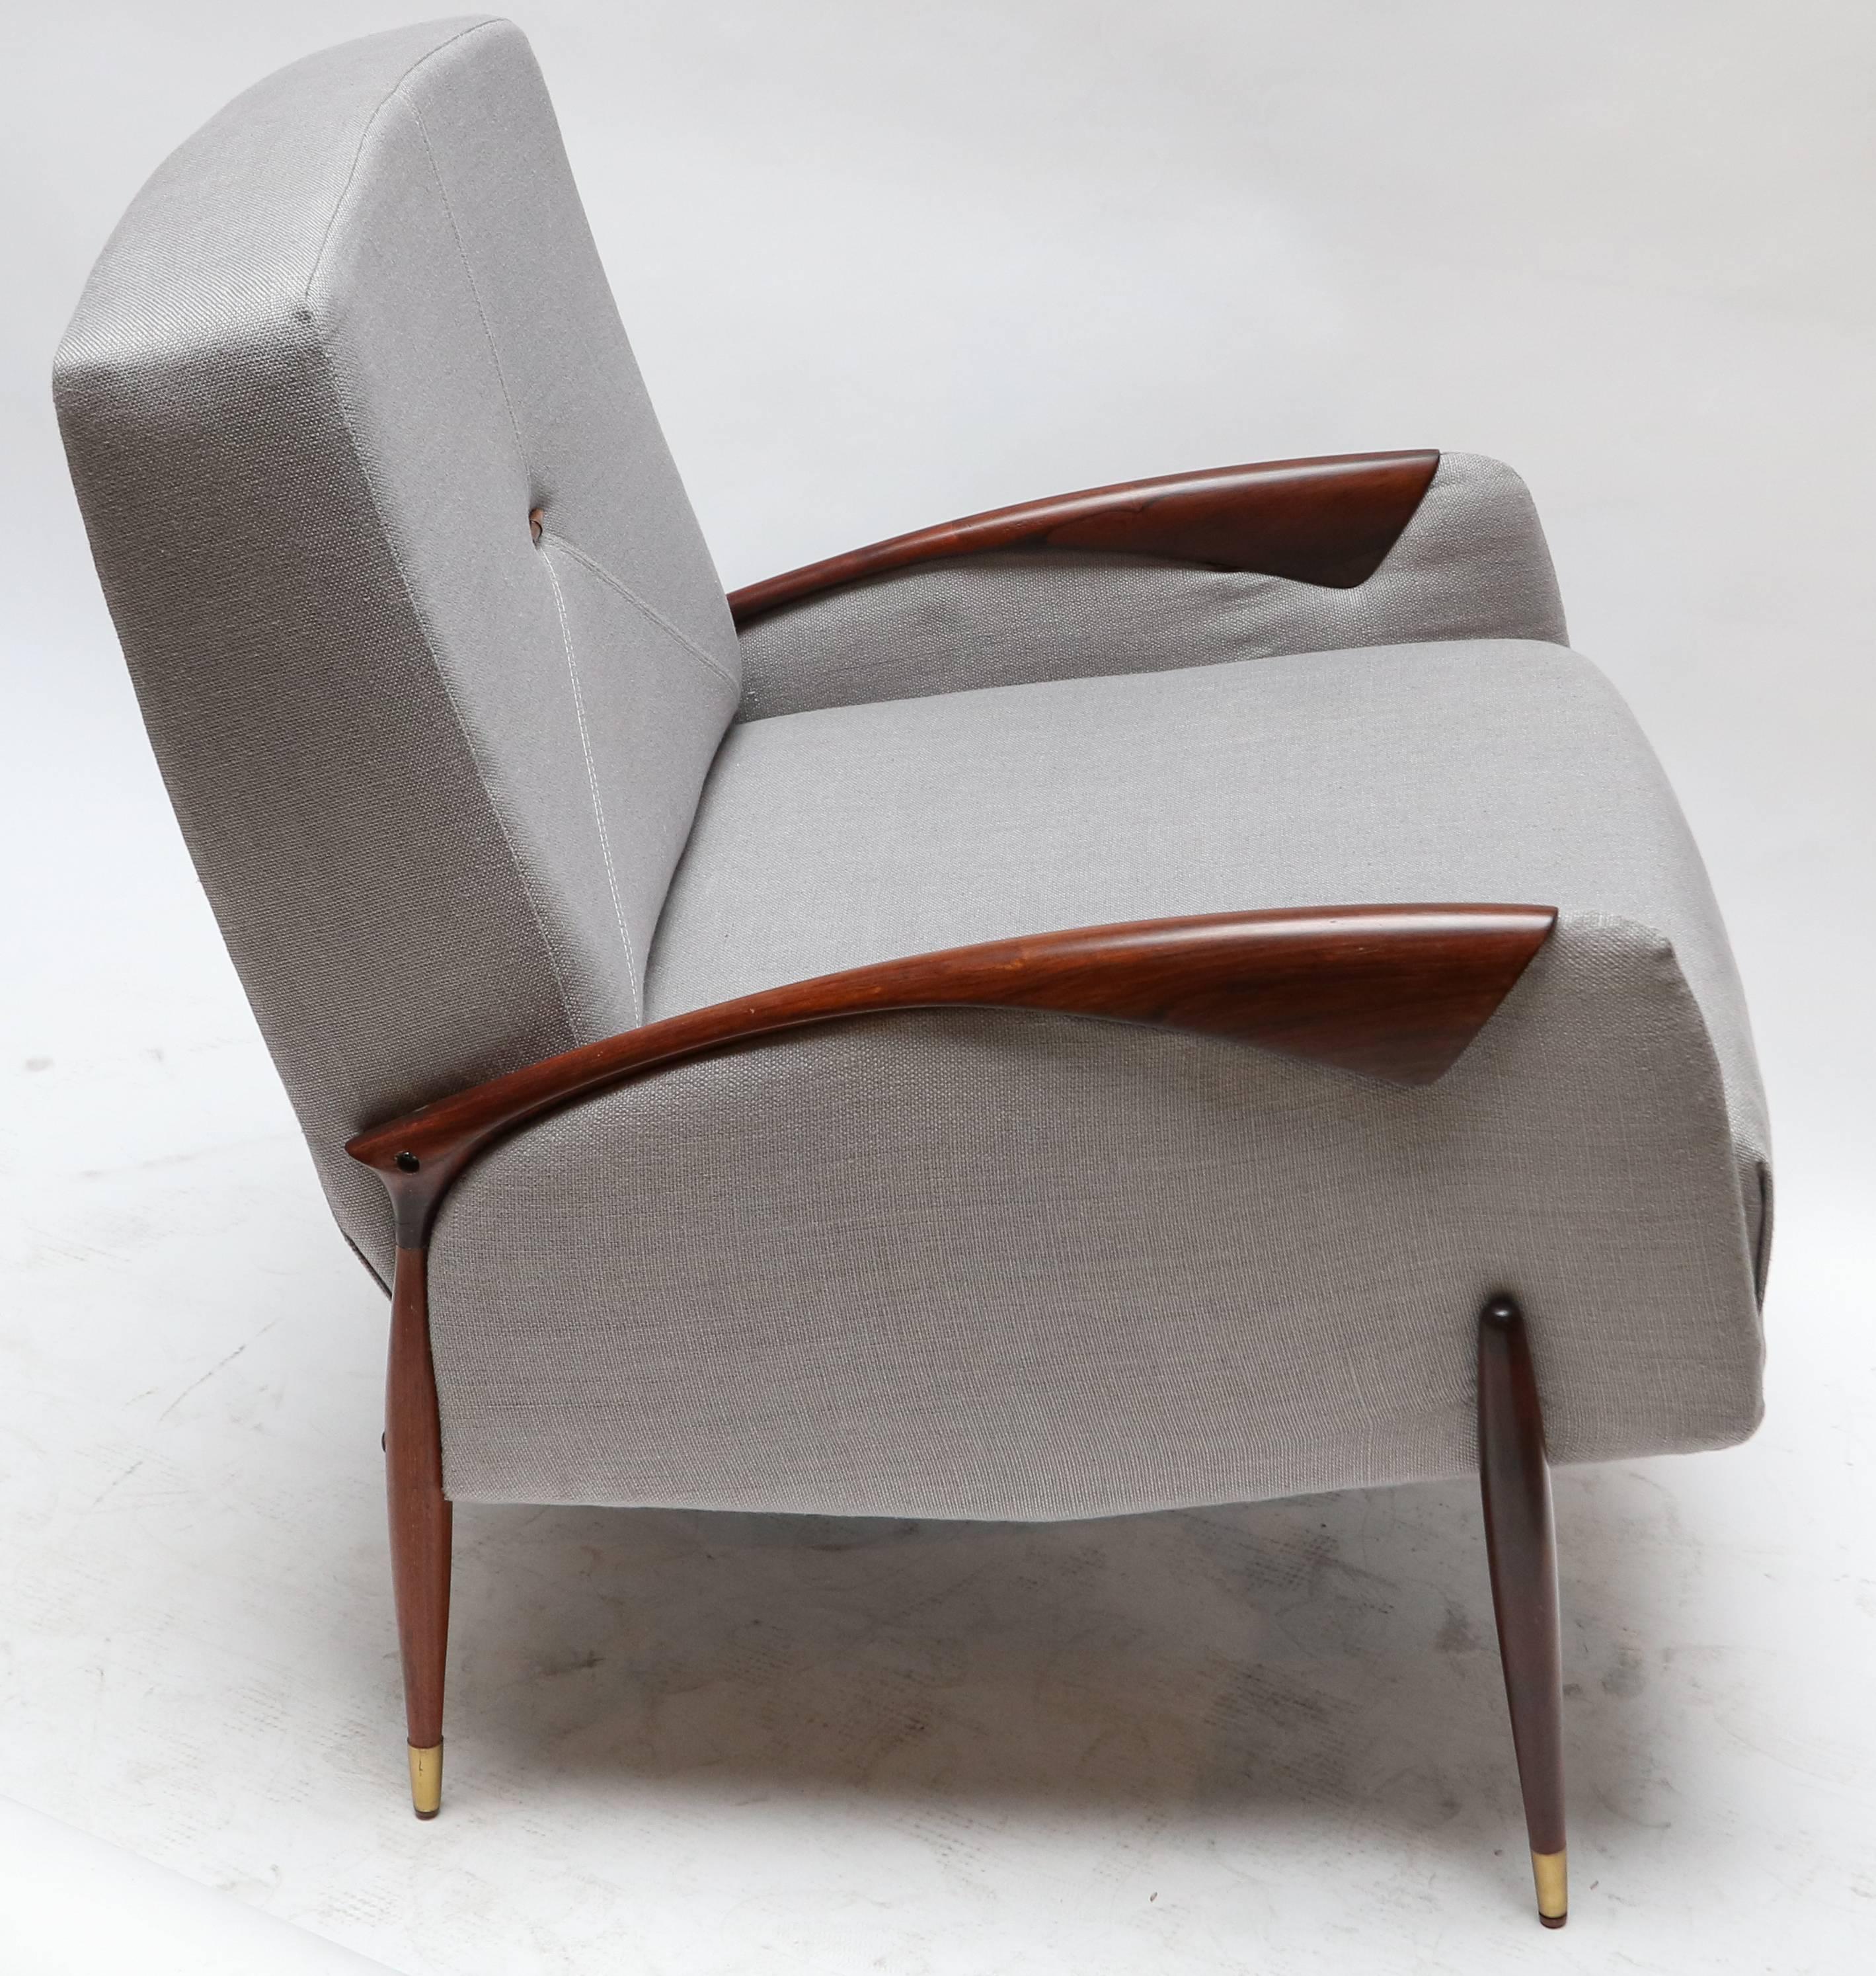 Pair of Brazilian armchairs by Scapinelli in jarcaranda and grey linen.